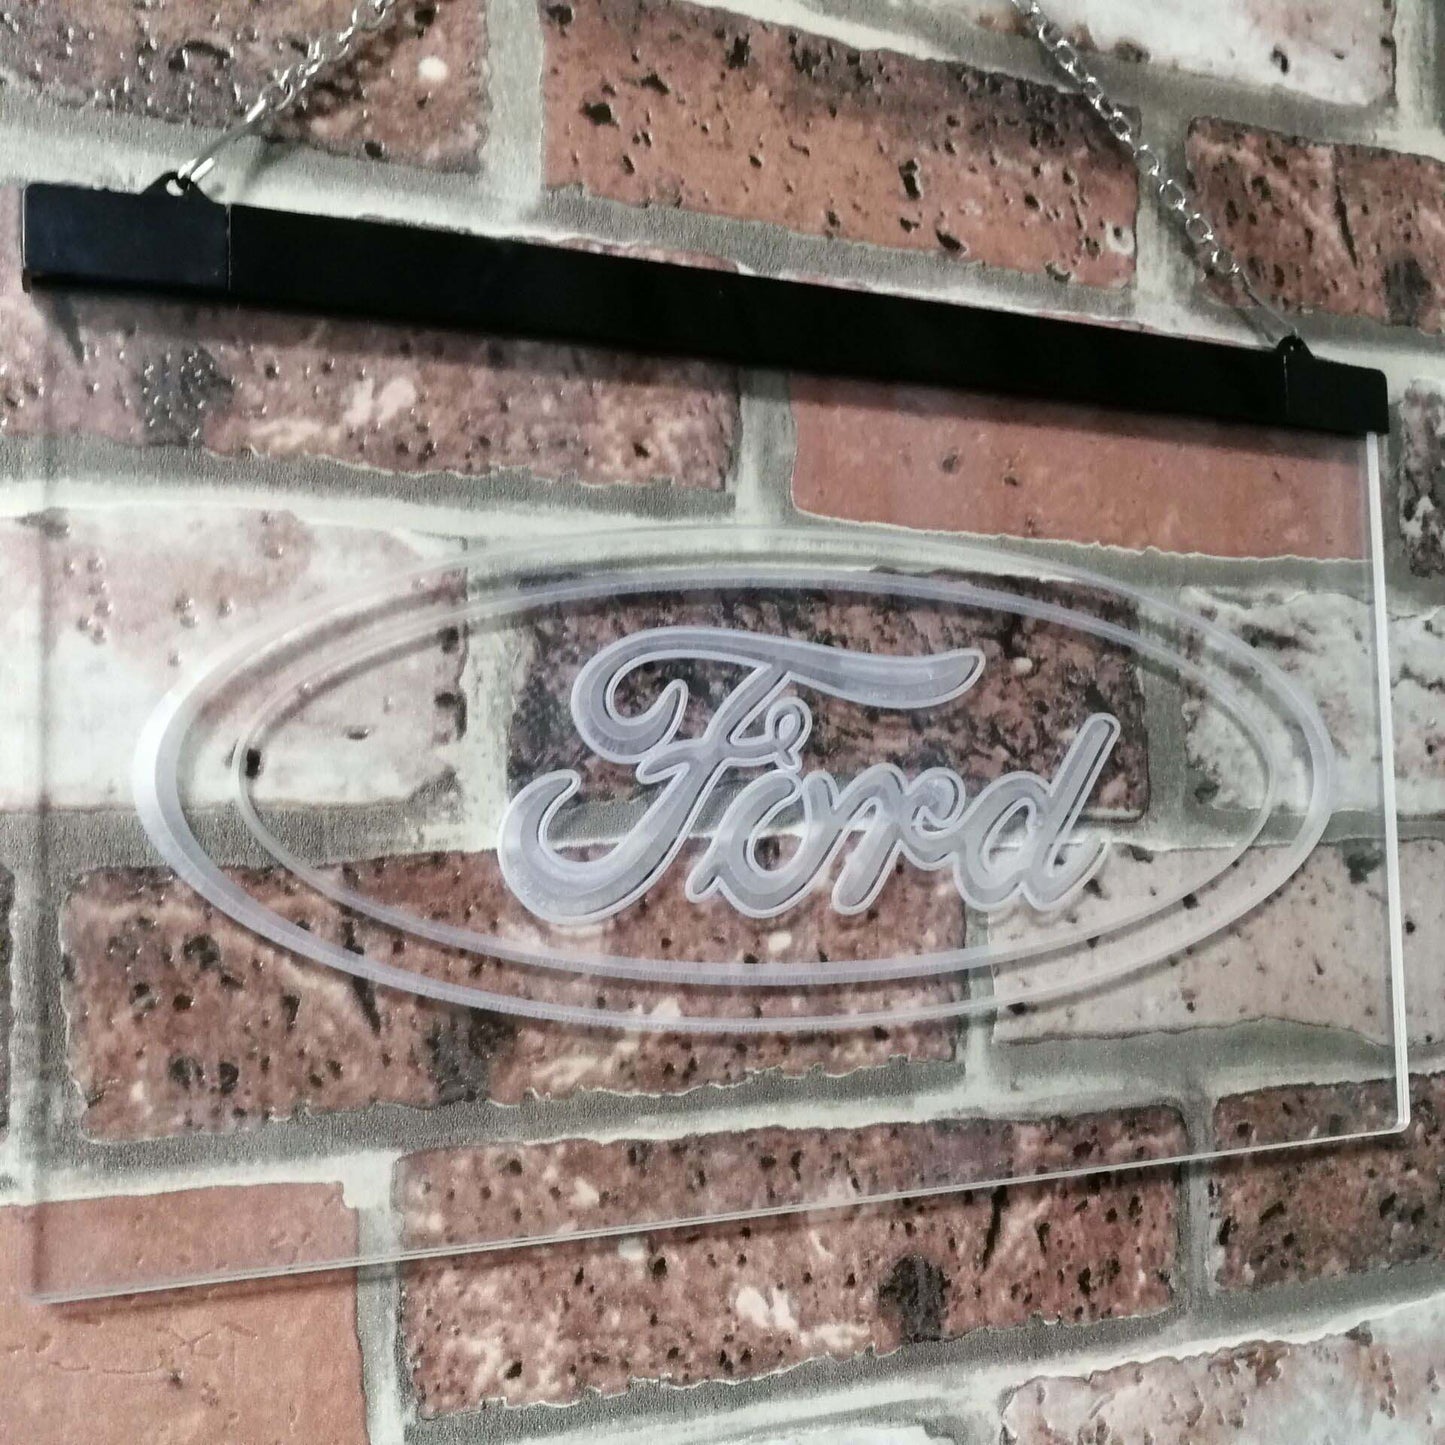 Ford car Transport Bar Decoration Gift Dual Color Led Neon Light Signs st6-d0007 by Woody Signs Co. - Handmade Crafted Unique Wooden Creative